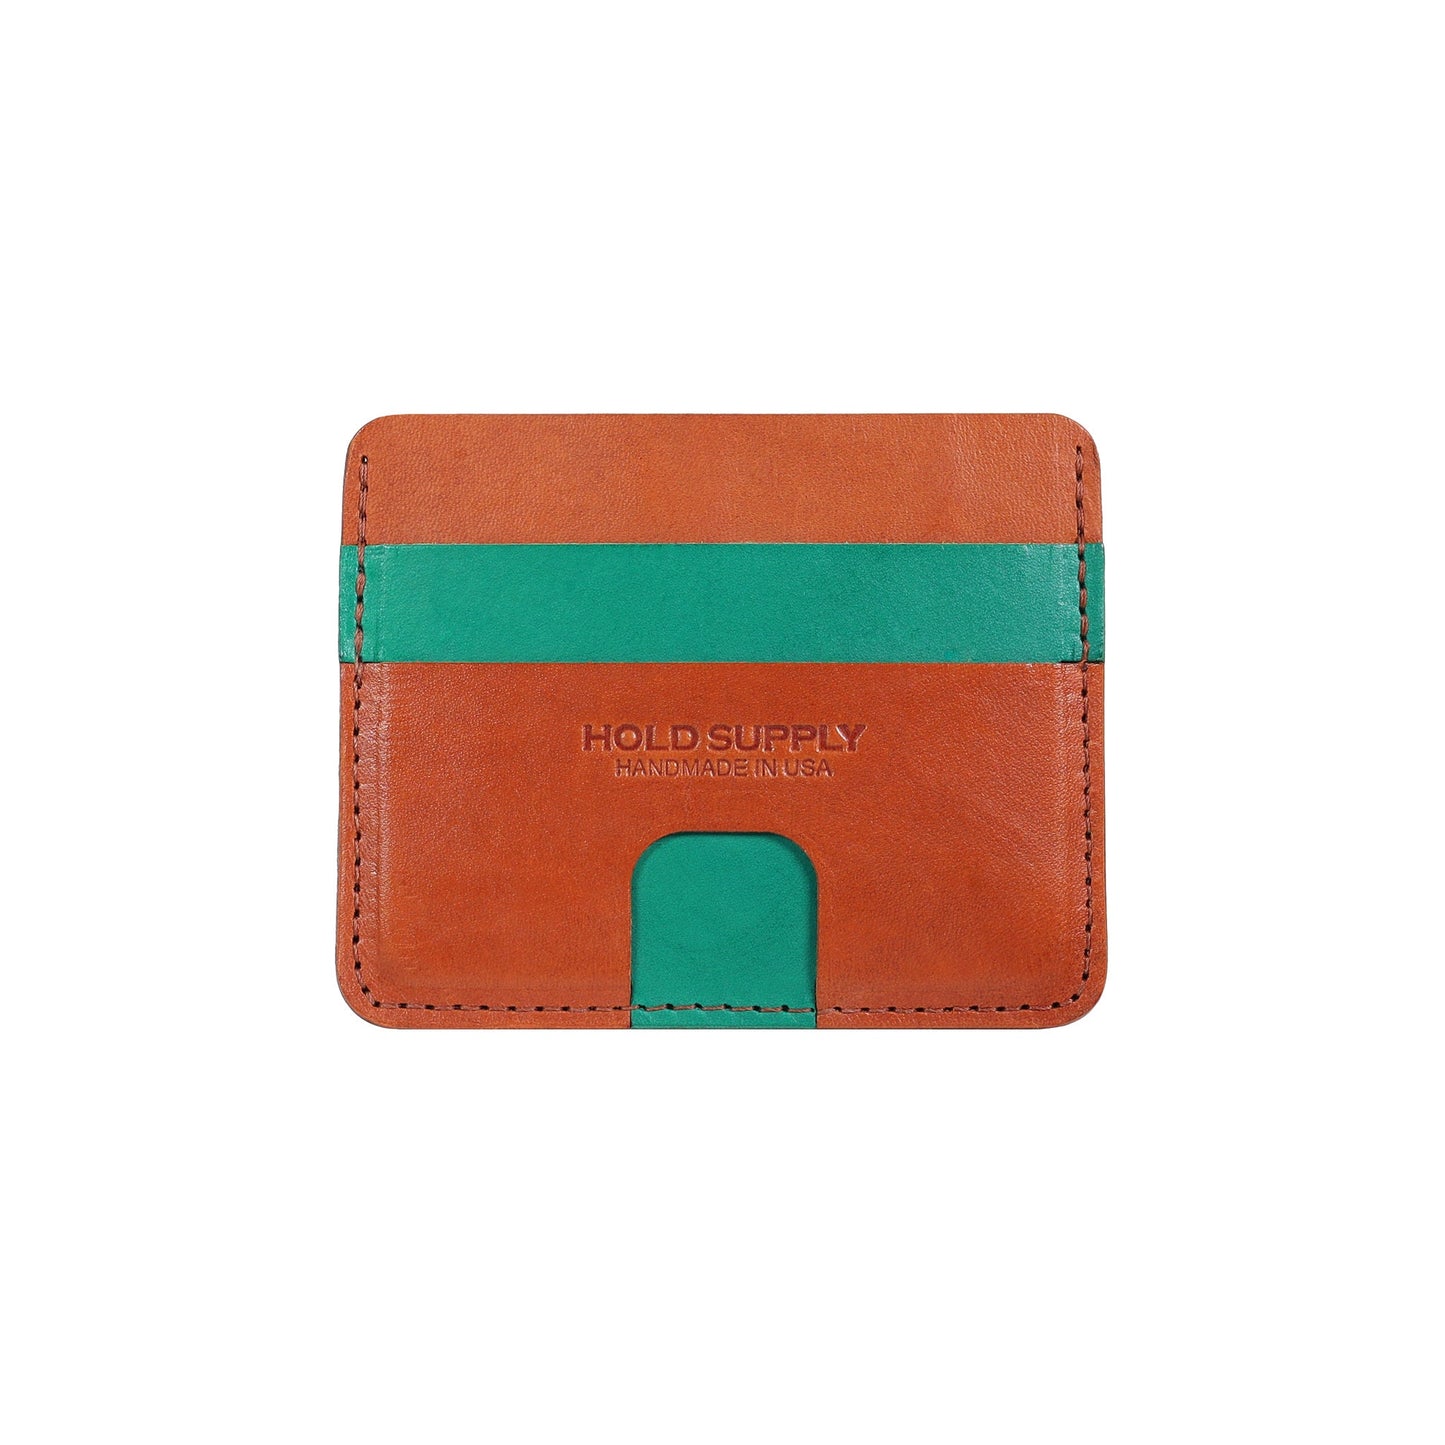 Green and Brown Leather Card Holder Wallet